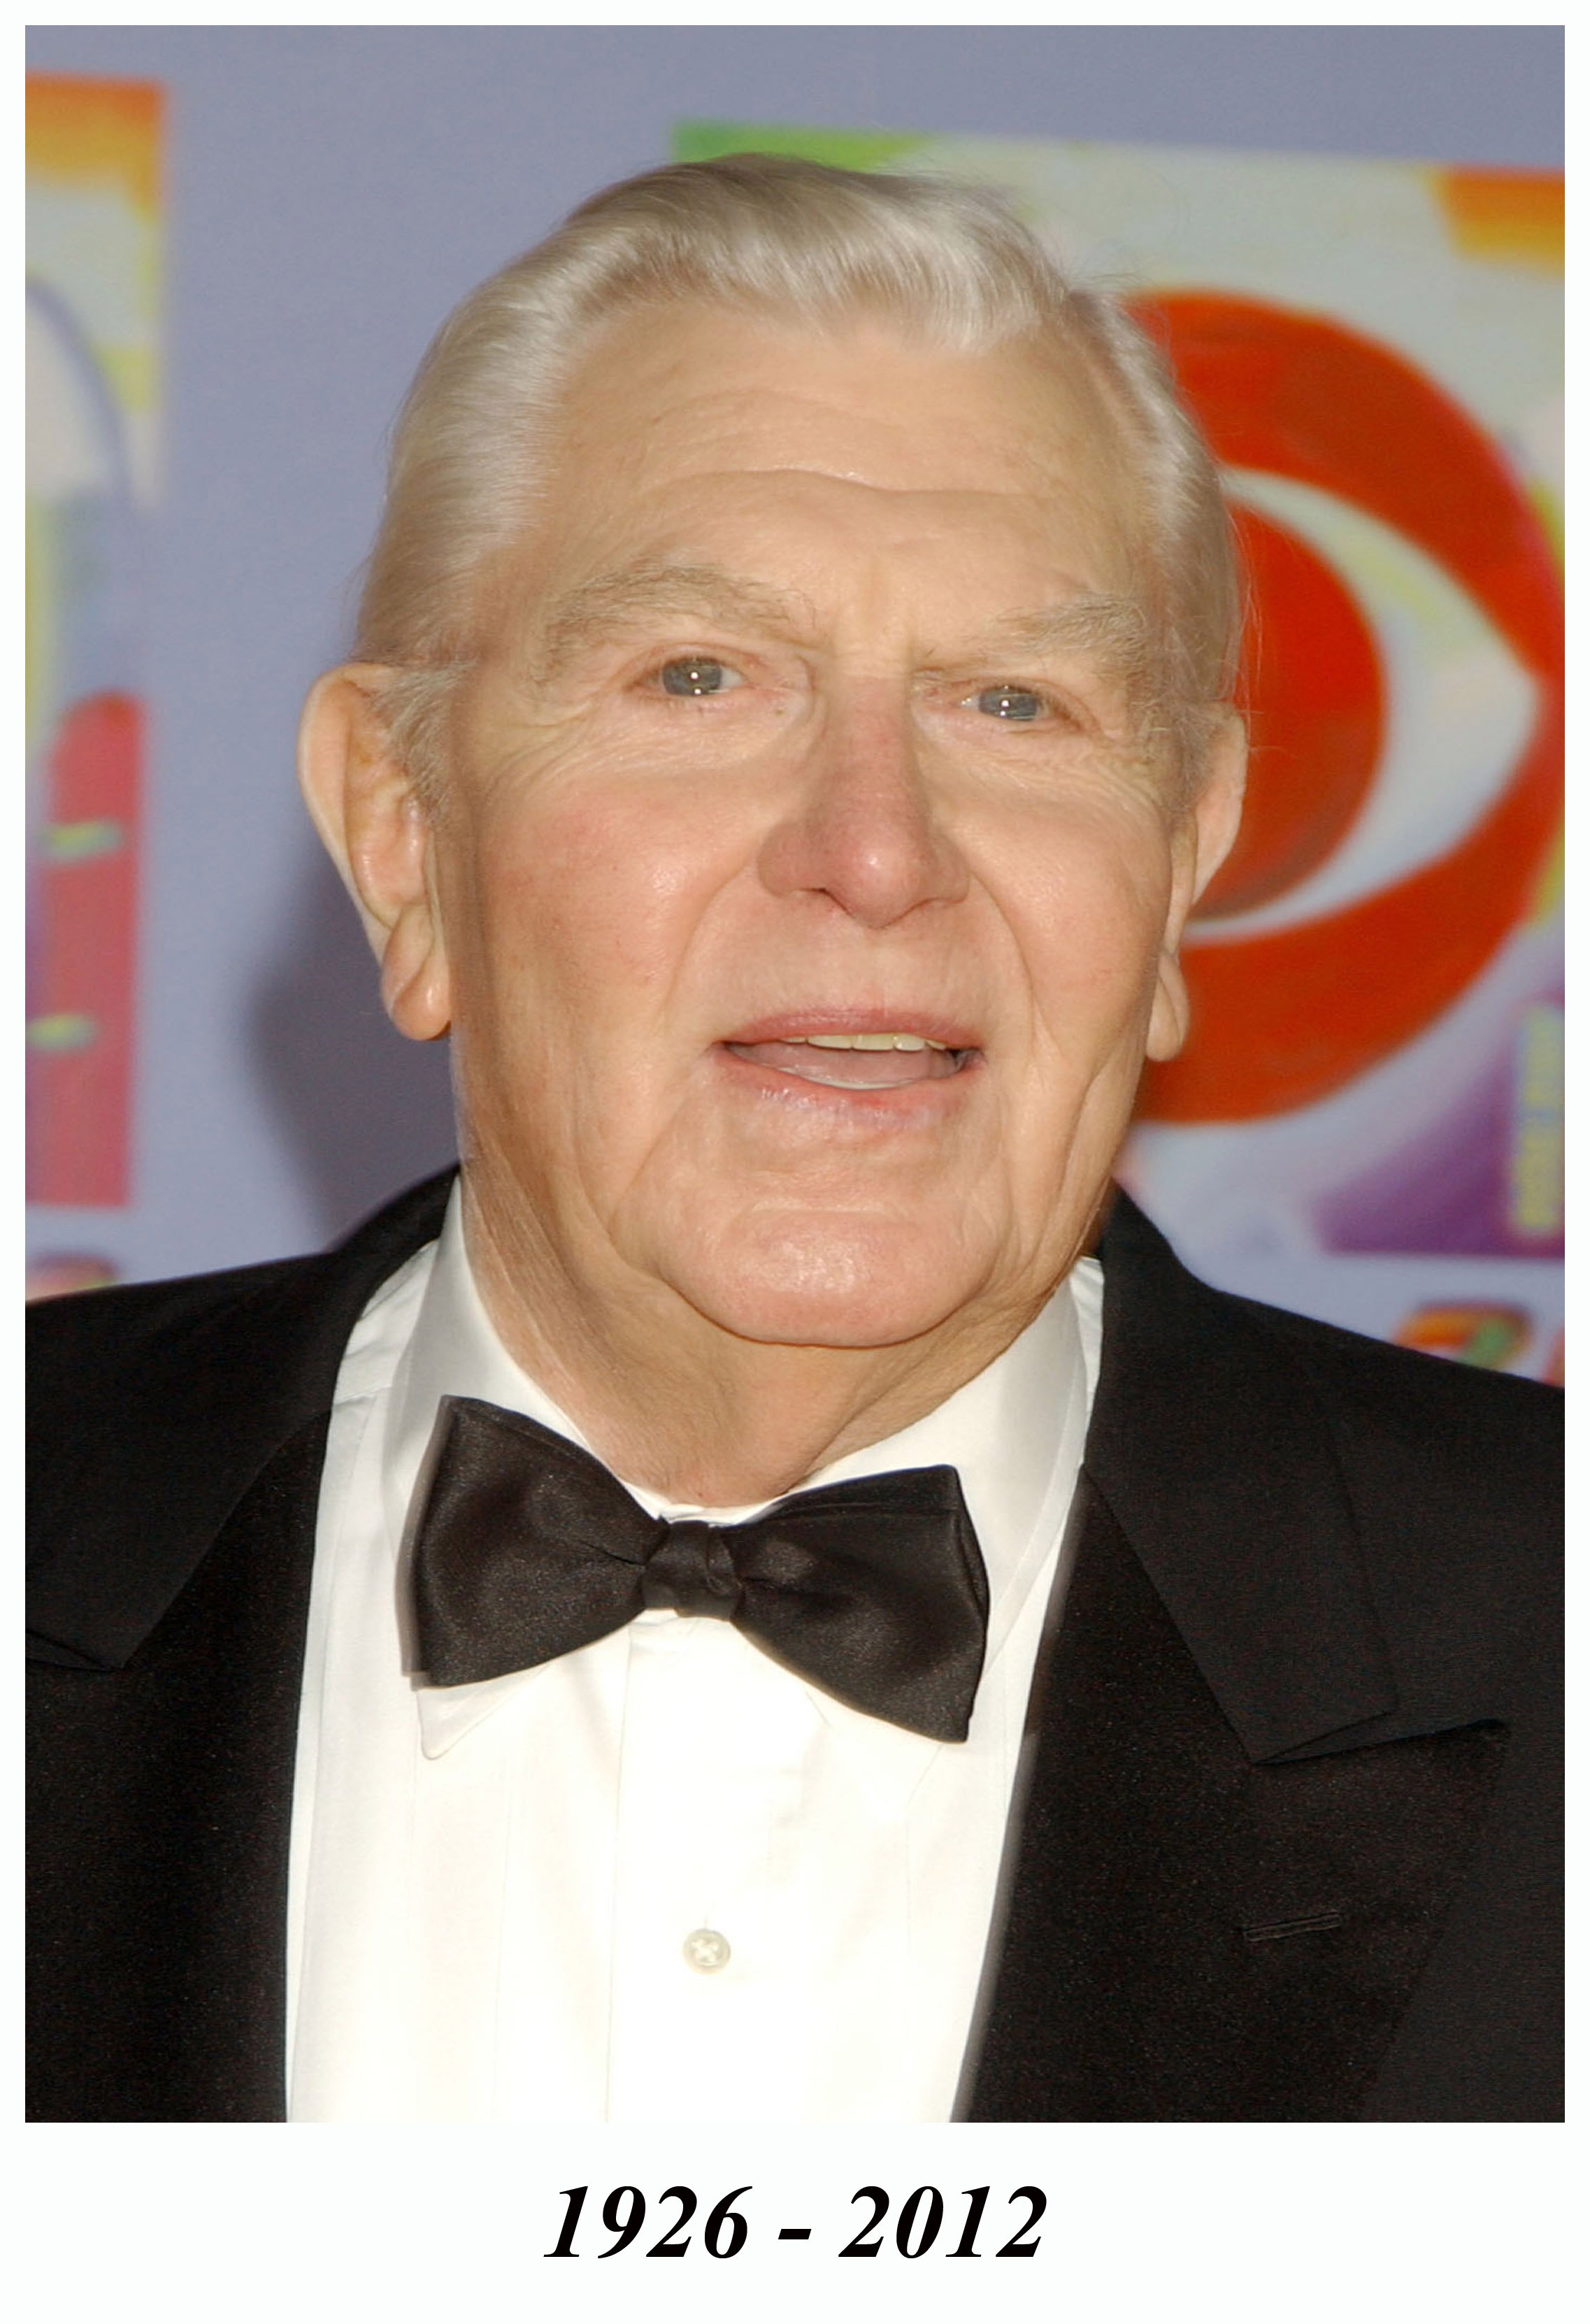 Andy Griffith during CBS at 75 - Commemorating CBS'S 75th Anniversary - Arrivals at The Hammerstein Theater on November 2, 2003 in New York City. He passed on in 2012. | Source: Getty Images